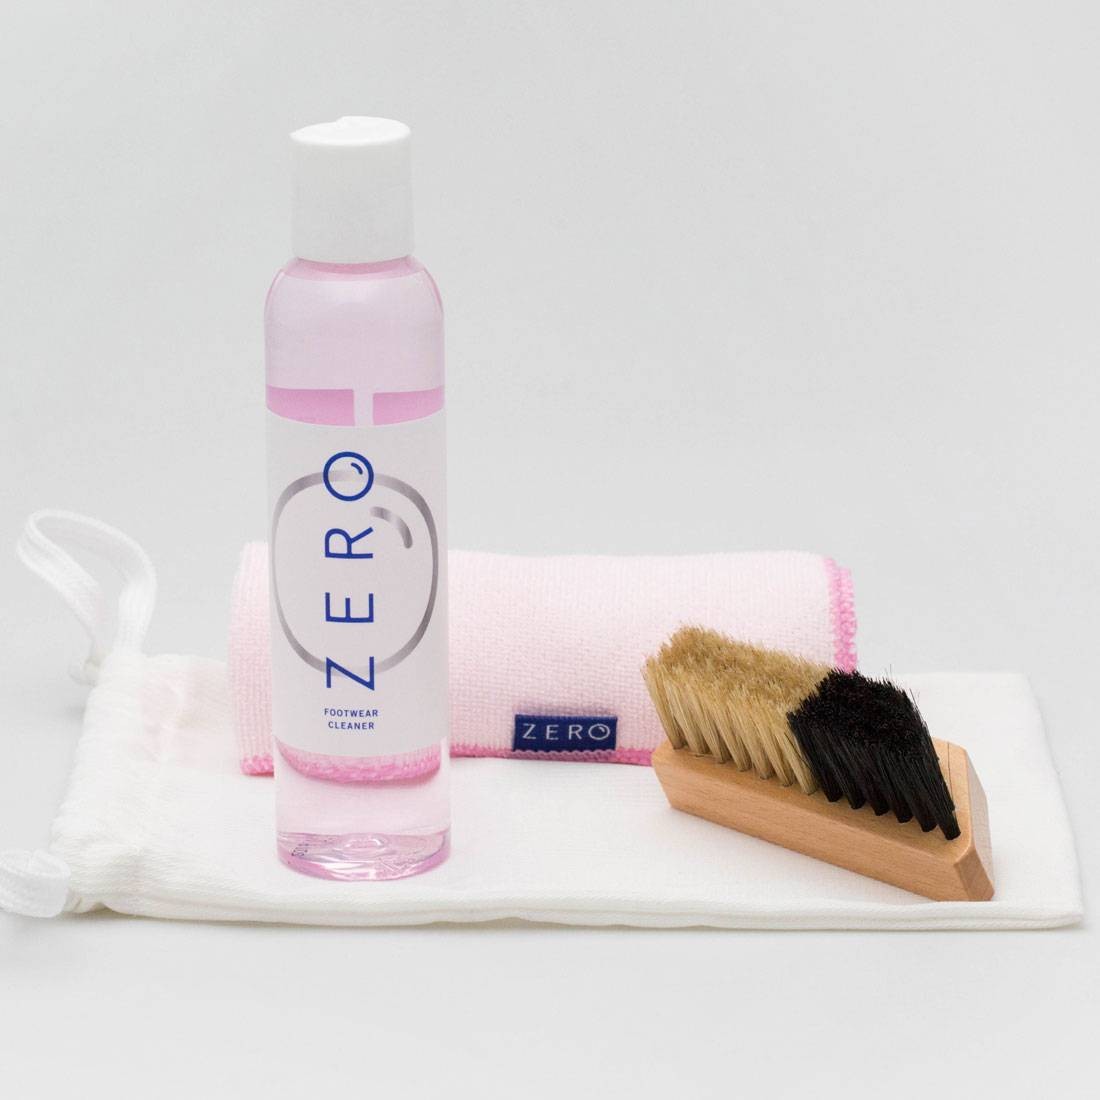 Zero Footwear Cleaner Kit With Brush And Towel